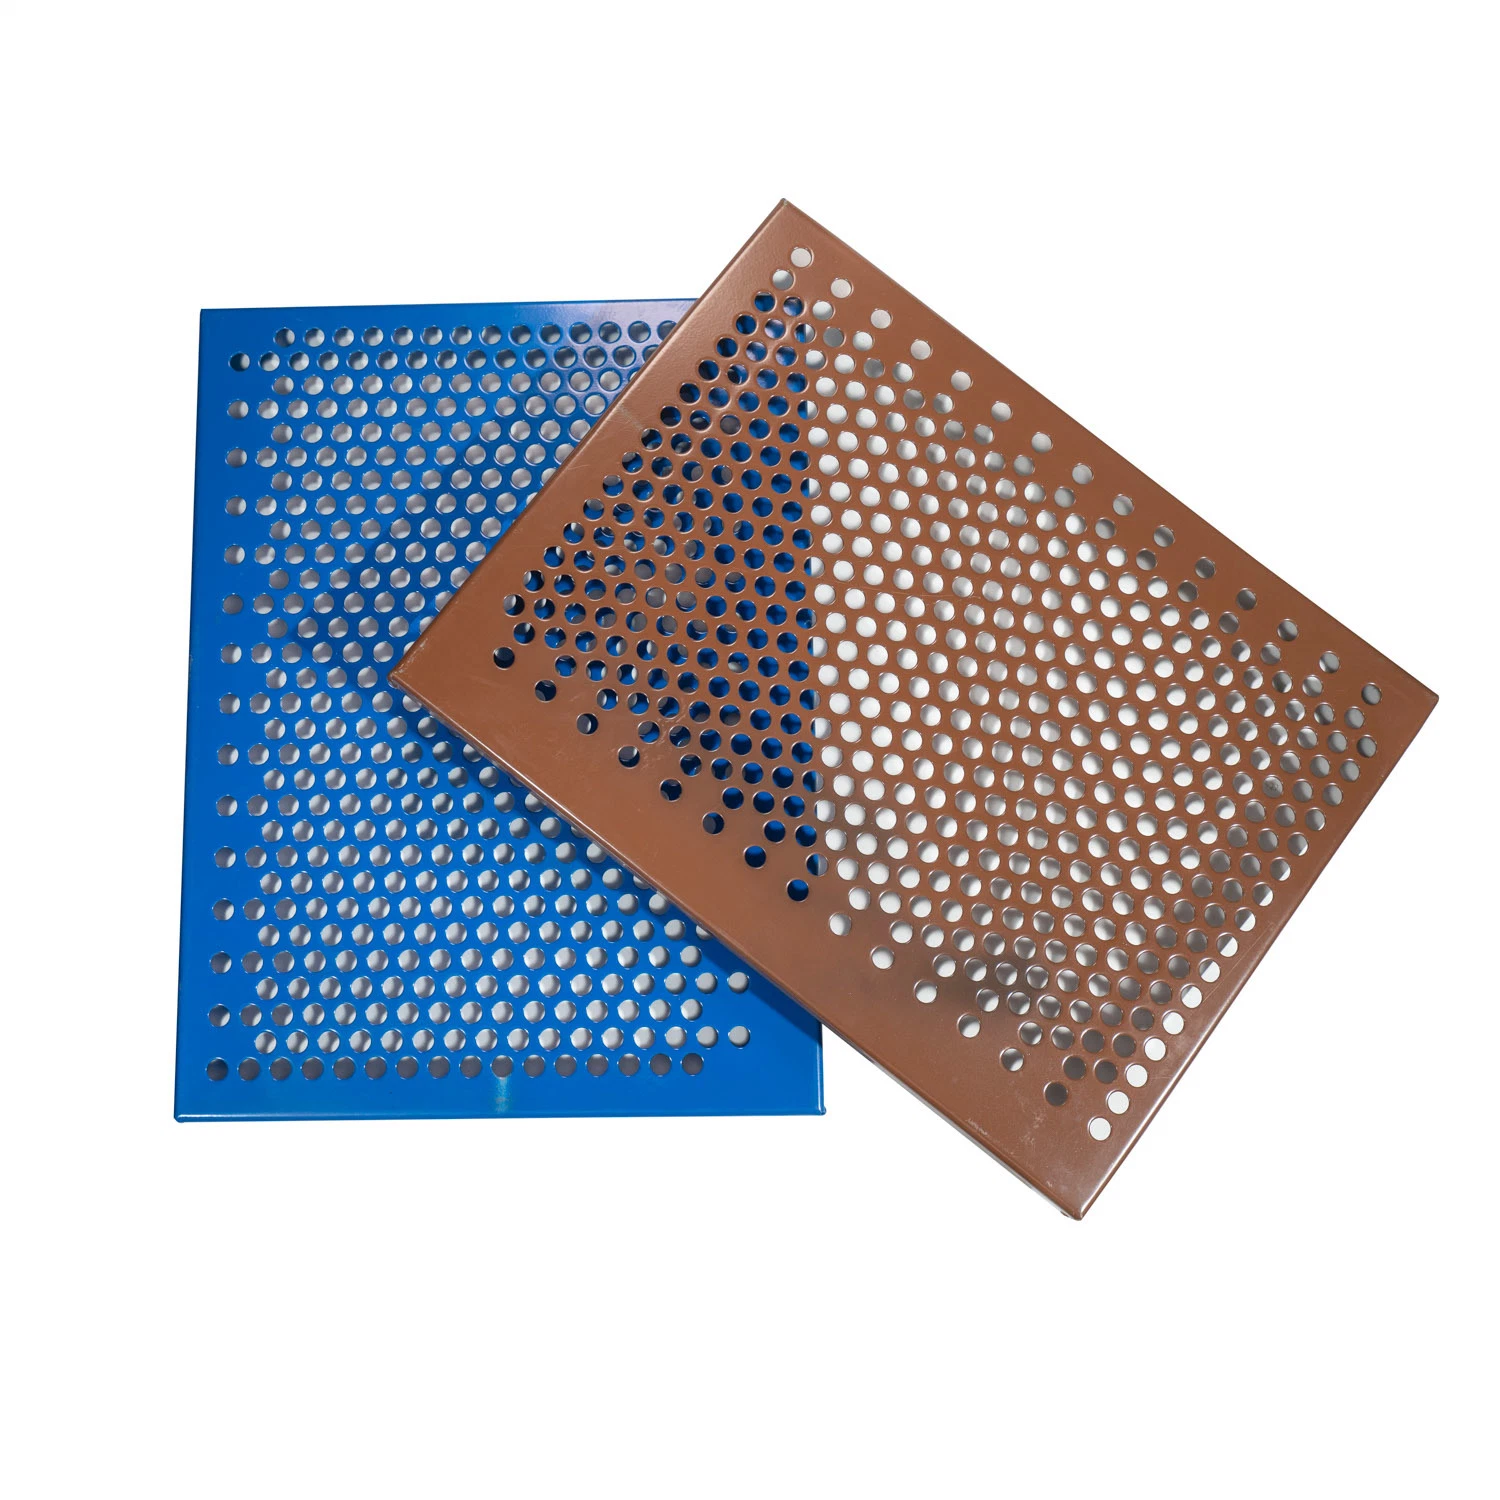 Stainless Steel Galvanized Aluminum Perforated Metal Mesh Sheet Powder Coating Perforated Steel Plate